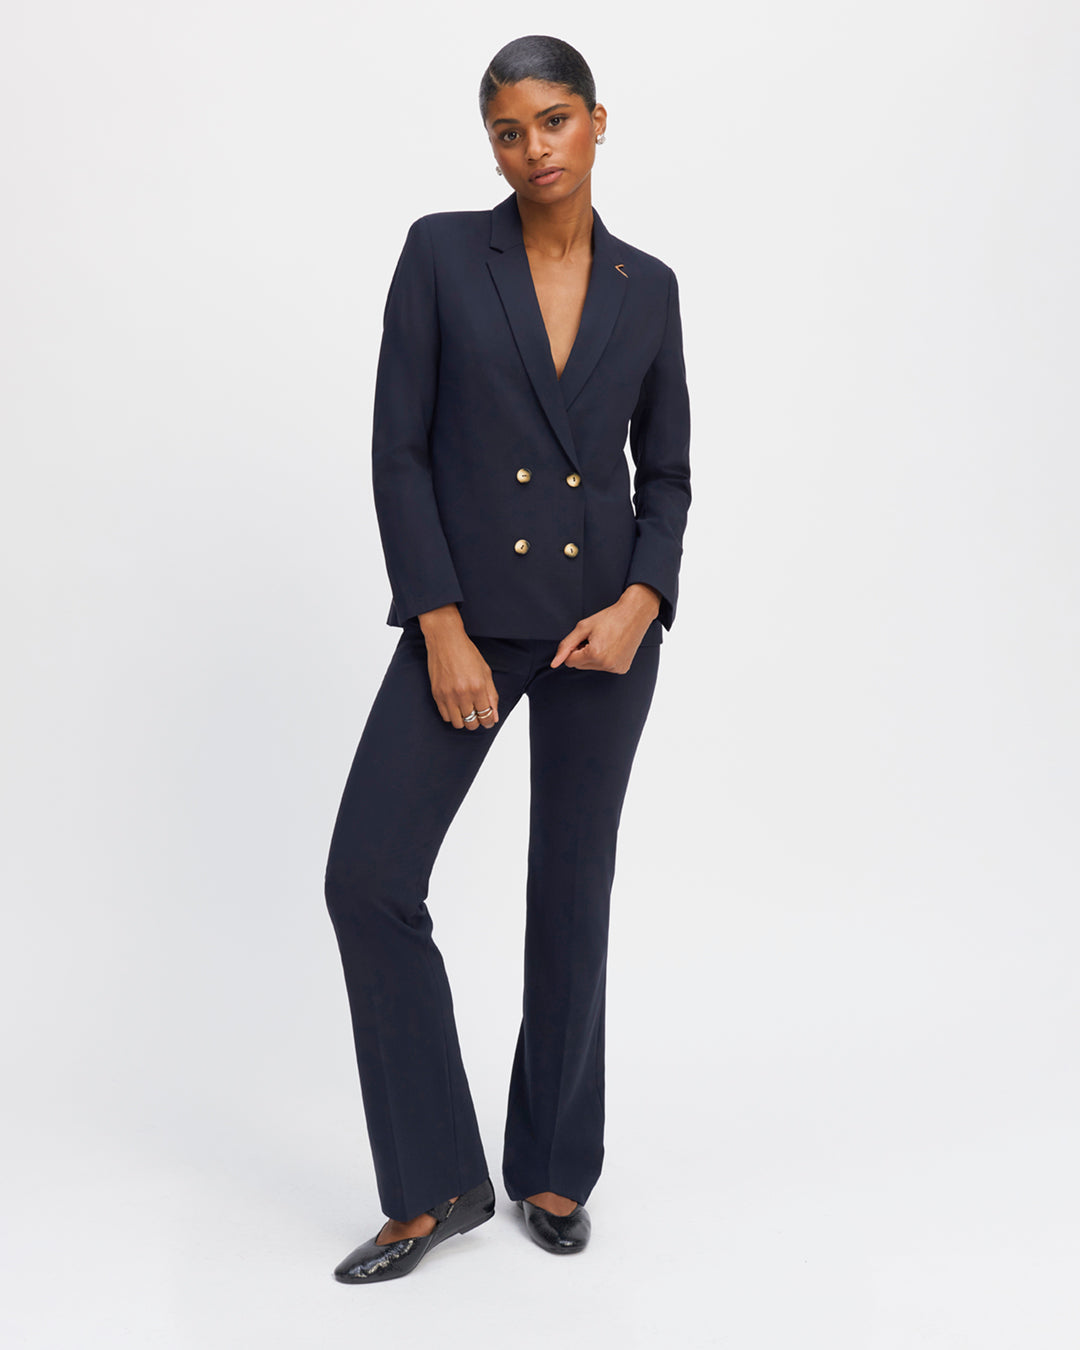 Tailored-crossover-jacket-blue-navy-four-buttons-length-mid-bottom-straight-cut-entirely-lined-Drap-of-laine-trees-soft-and-thermoregulator-Material-coming-from-a-great-italian-draper-17H10-tailored-jacket-for-women-paris-